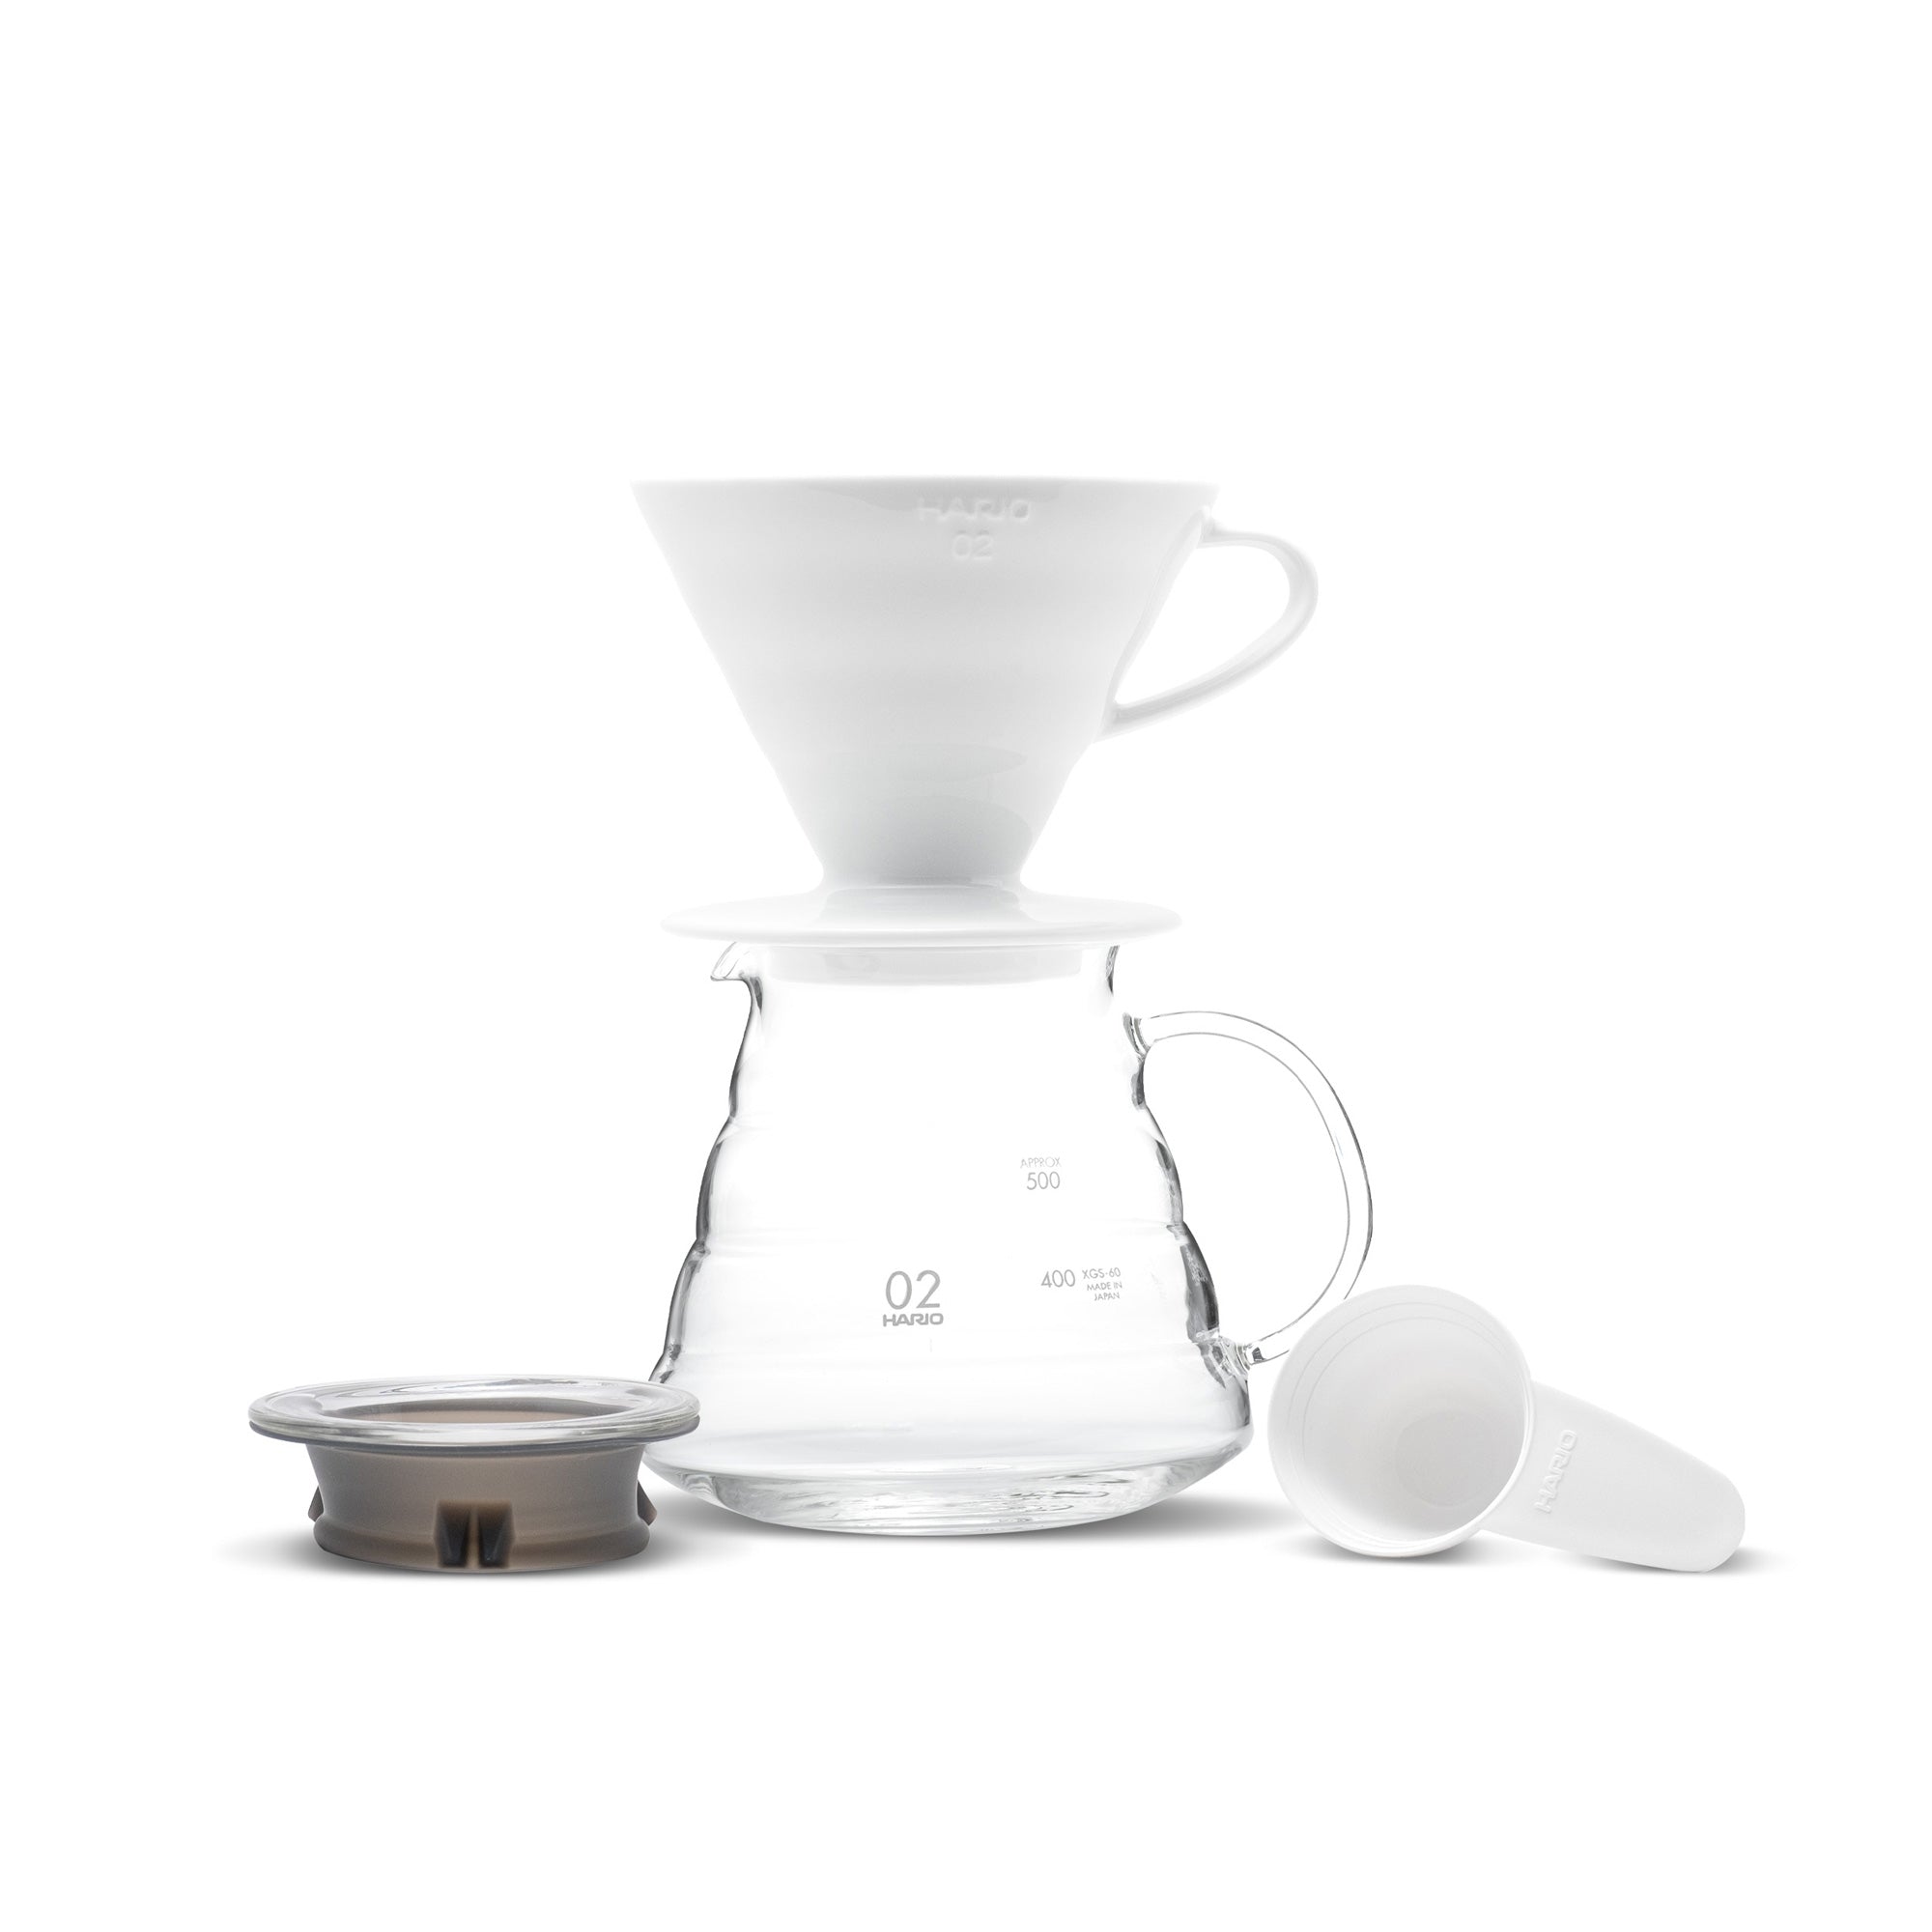 Poursteady: Automatic Pour Over Coffee Maker Machine